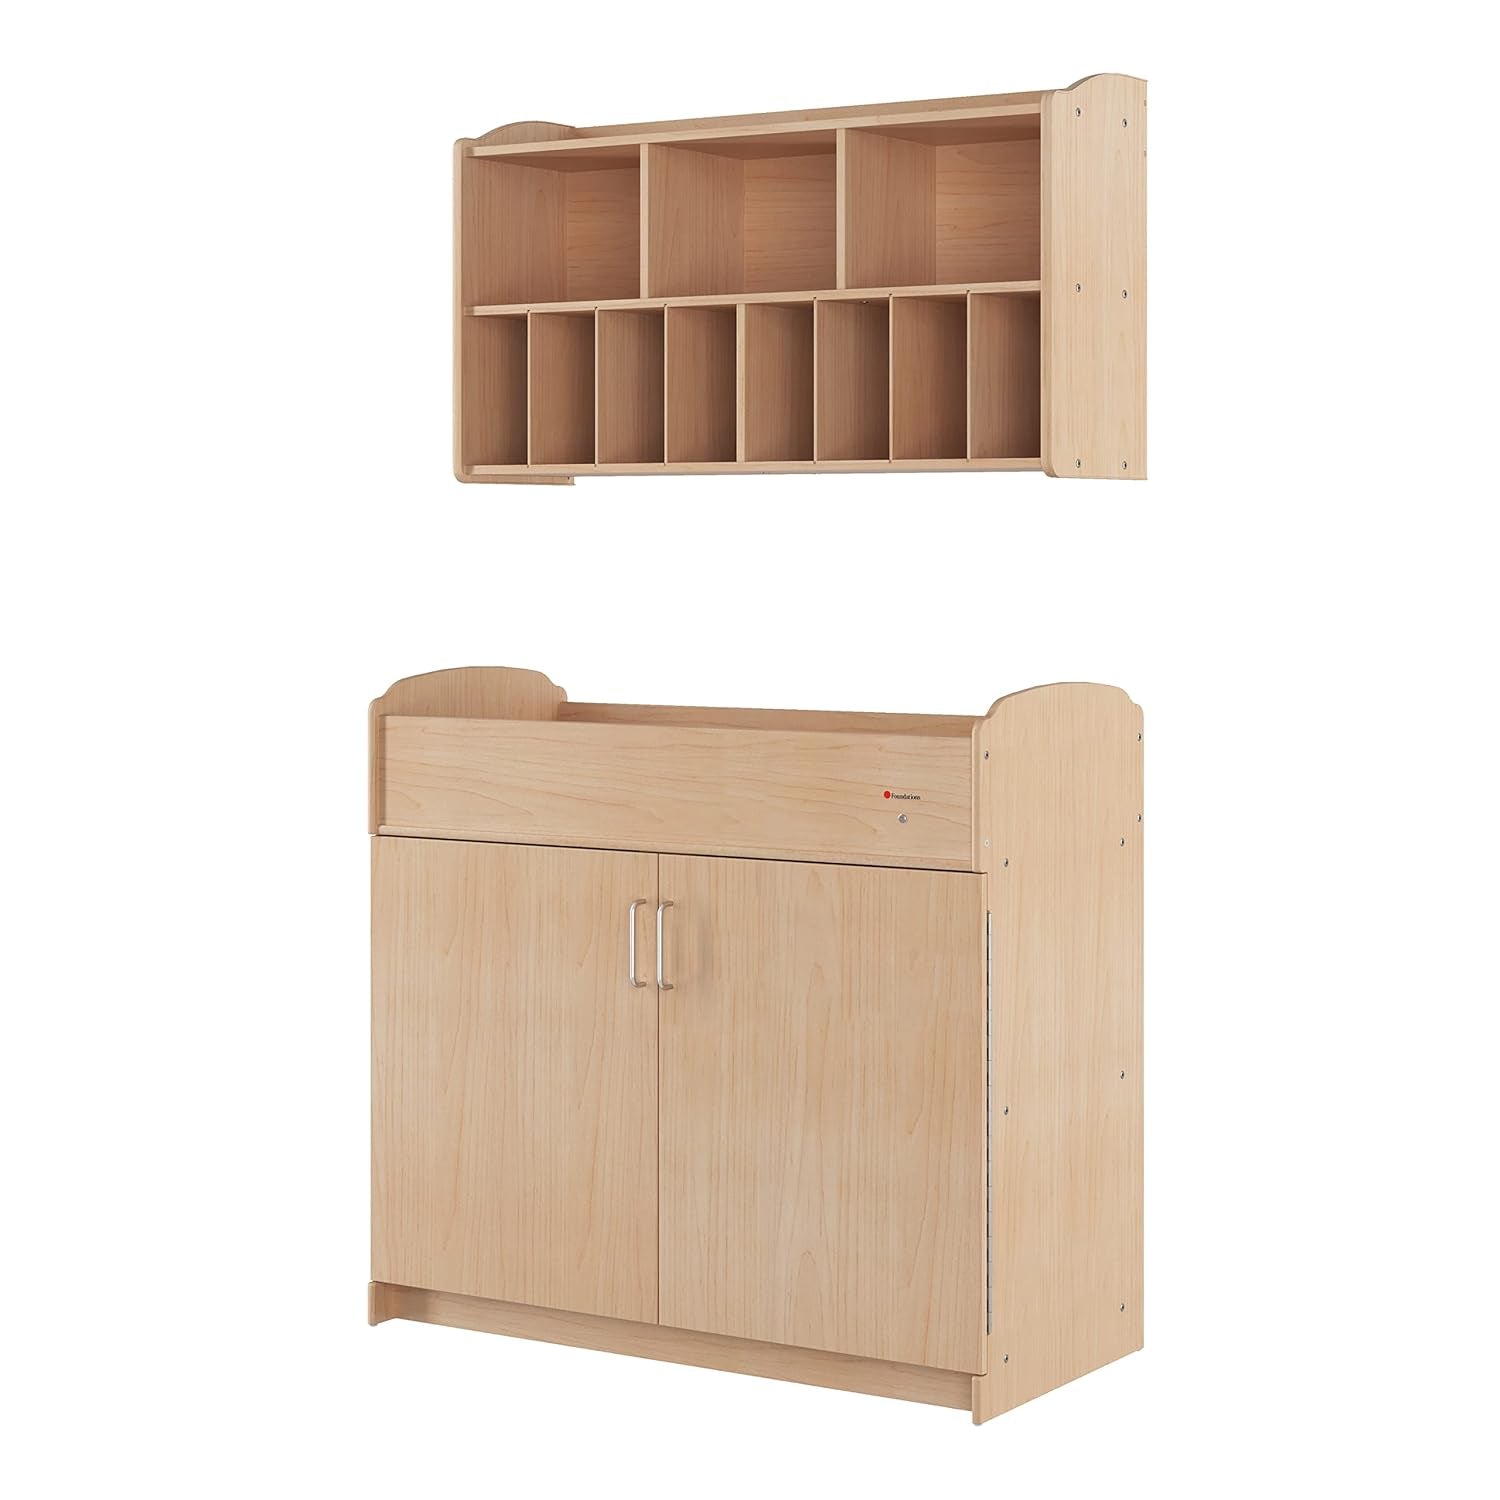 Serenity Daycare Changing Table with Storage Cubbies, Durable Wood Construction, Built-In Shelving for Ample Storage, Adjustable Safety Strap, Includes 1” Foam Mattress Pad (Natural)